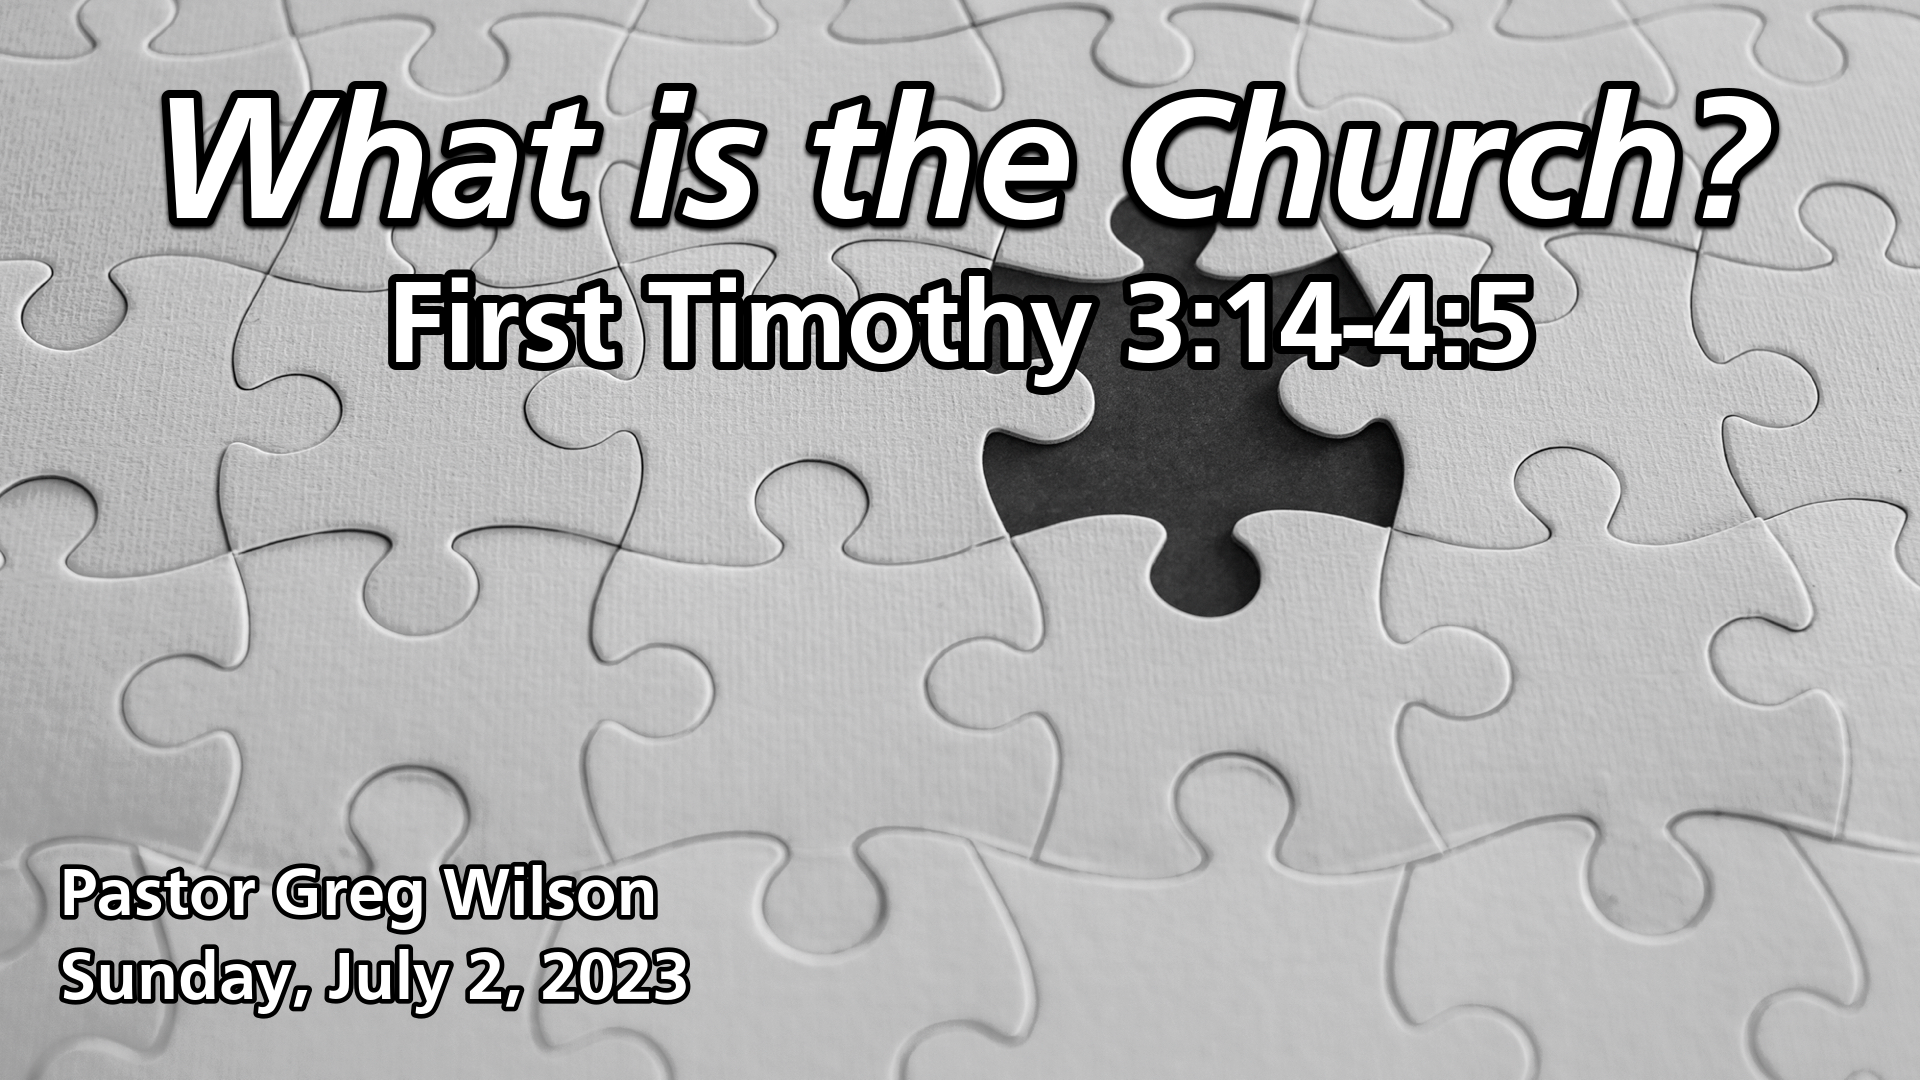 "What is the Church?"